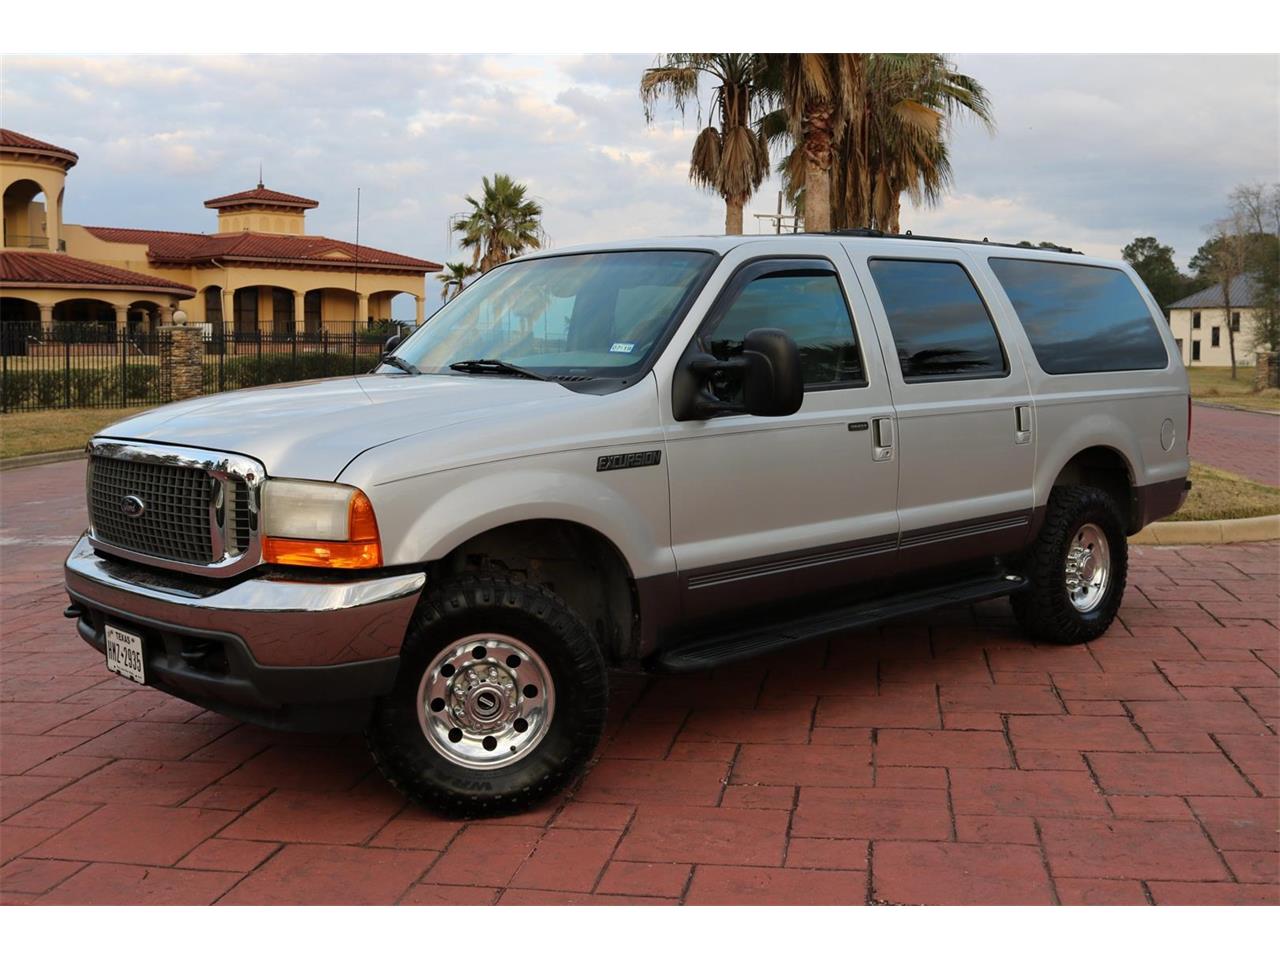 used ford excursion for sale in texas